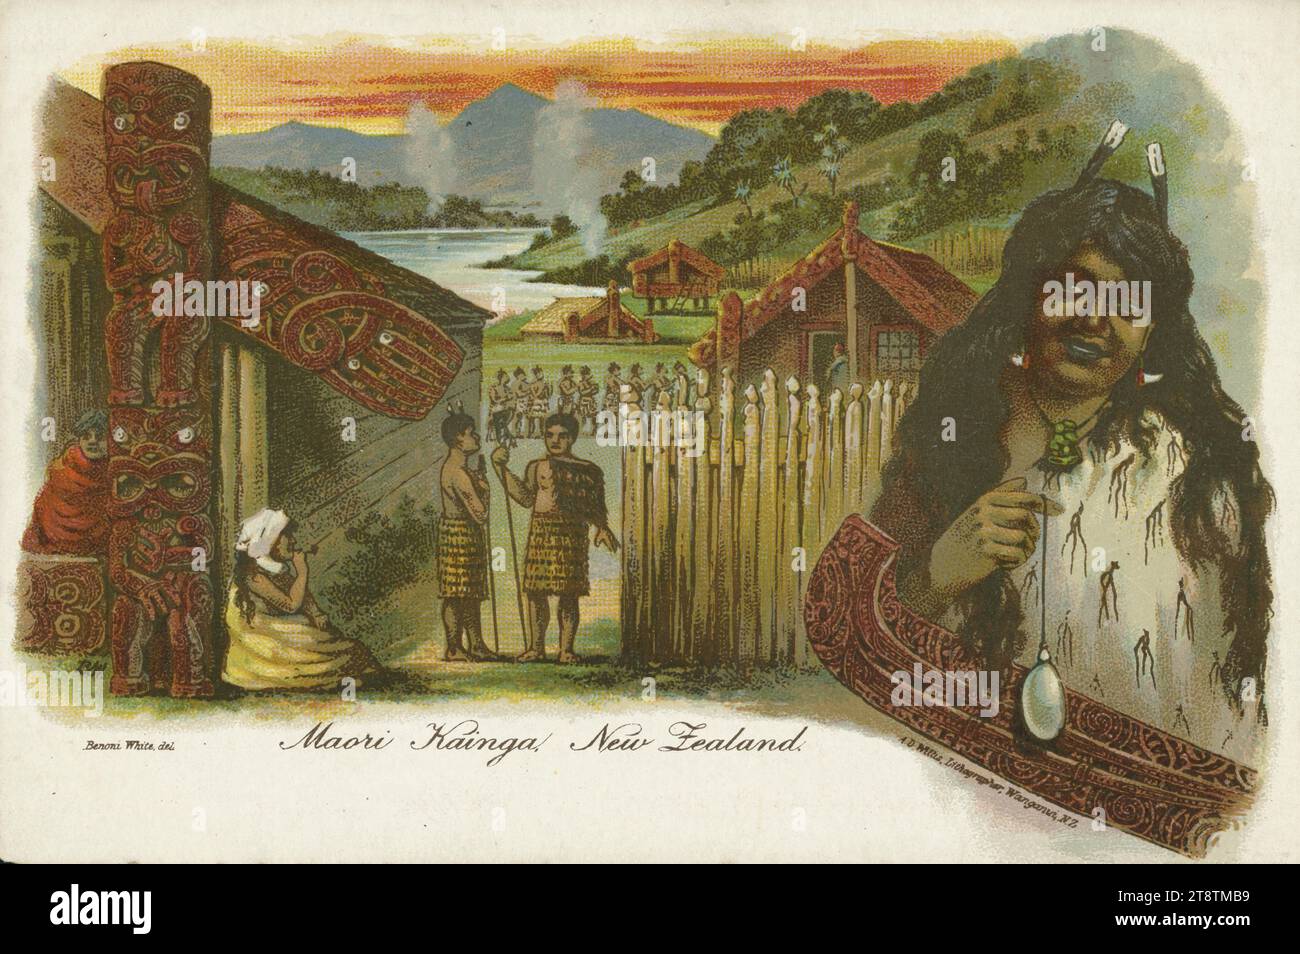 White, Benoni fl 1900s: Maori kainga, New Zealand. Benoni White del. A D Willis, lithographer, Wanganui, New Zealand, N.Z. 1902, Shows a Maori lakeside village, the whares with carved lintels. In the right foreground is a young Maori woman in traditional costume, holding a shining pendant. In front of her is a detail of a carved waka prow. The sky is orange Stock Photo